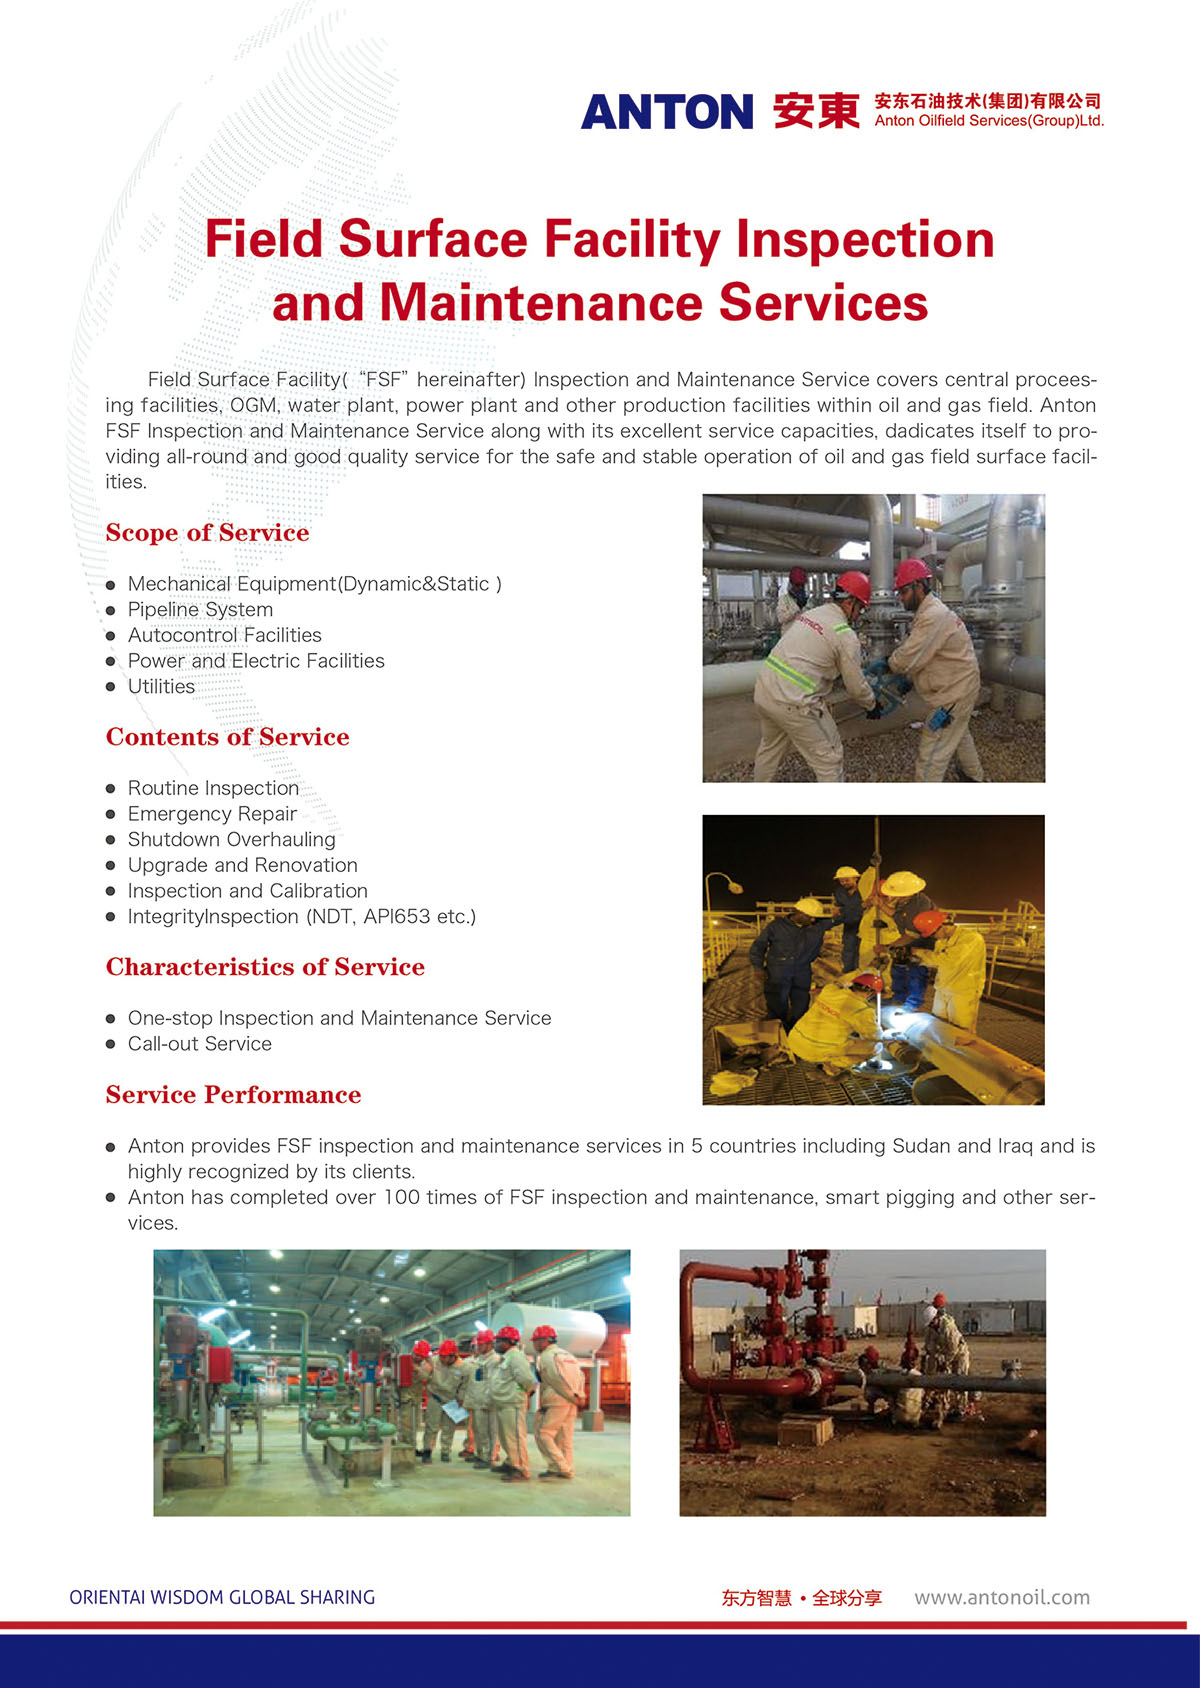  Field Surface Facility Inspection and Maintenance Services